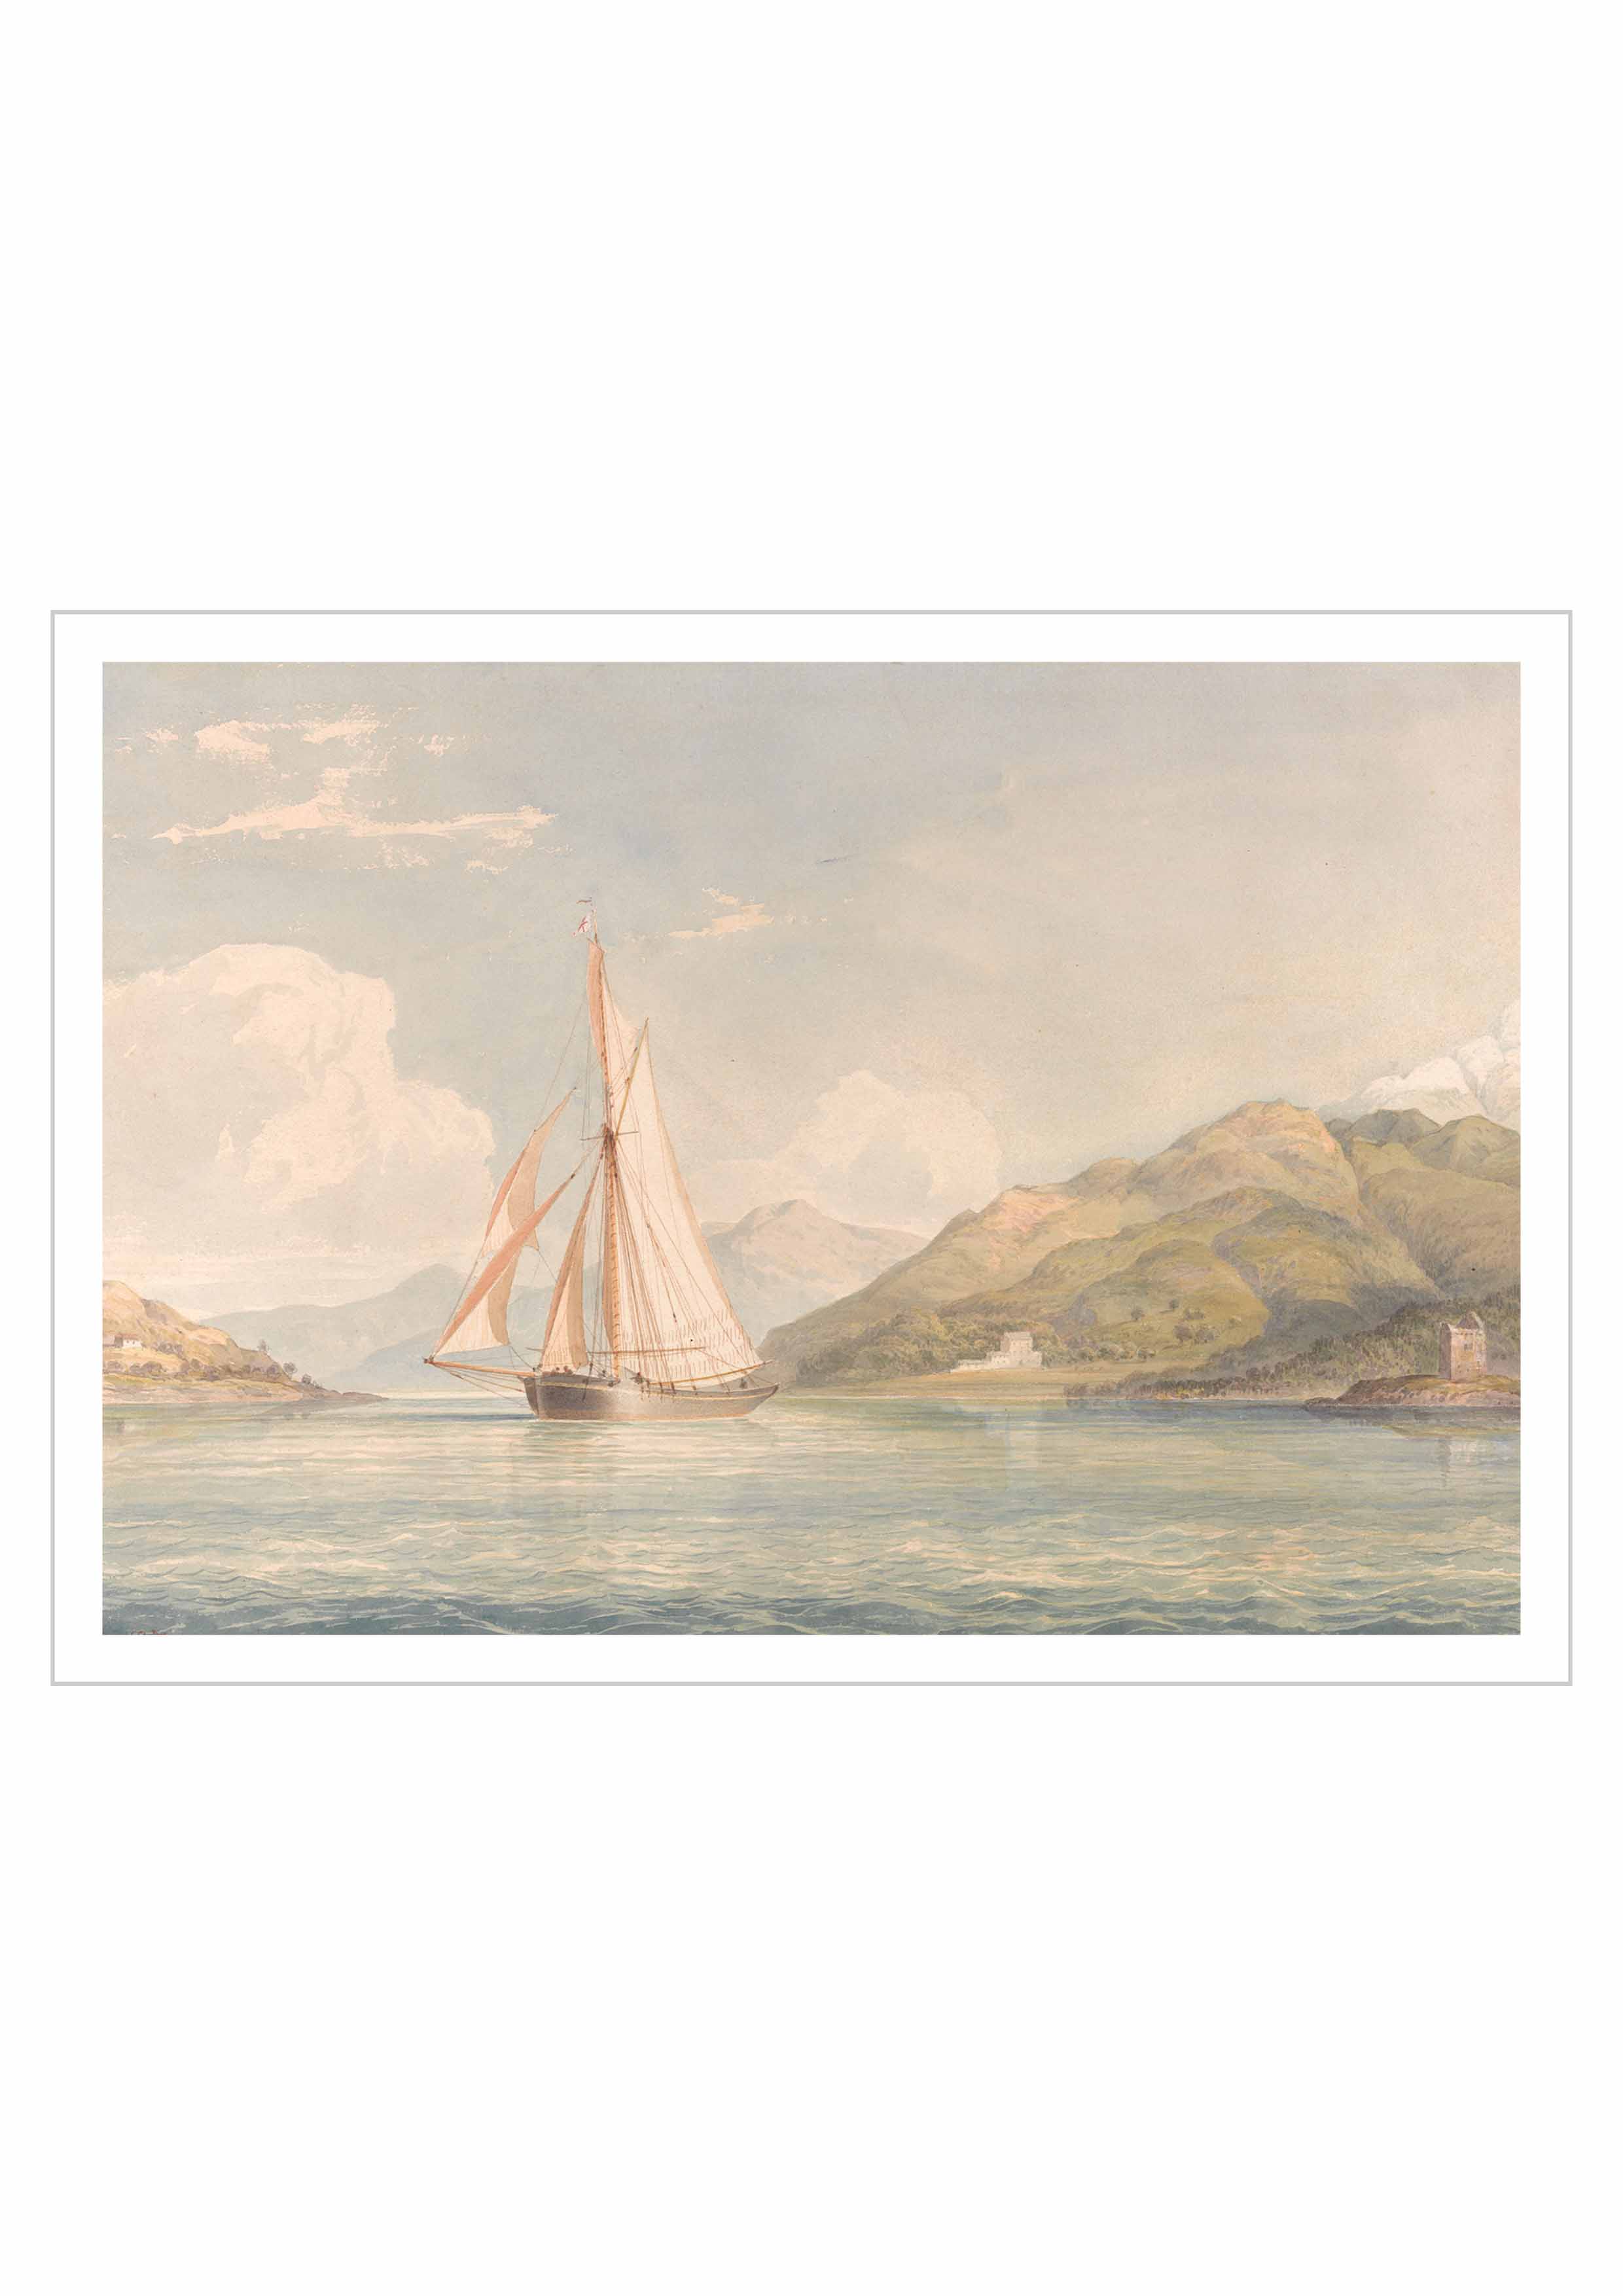 A fine art Poster "Boat Sailing to the Left with Mountains in the Background" from the British artist John Christian Schetky.  Digitally remastered for an ultra-high resolution.